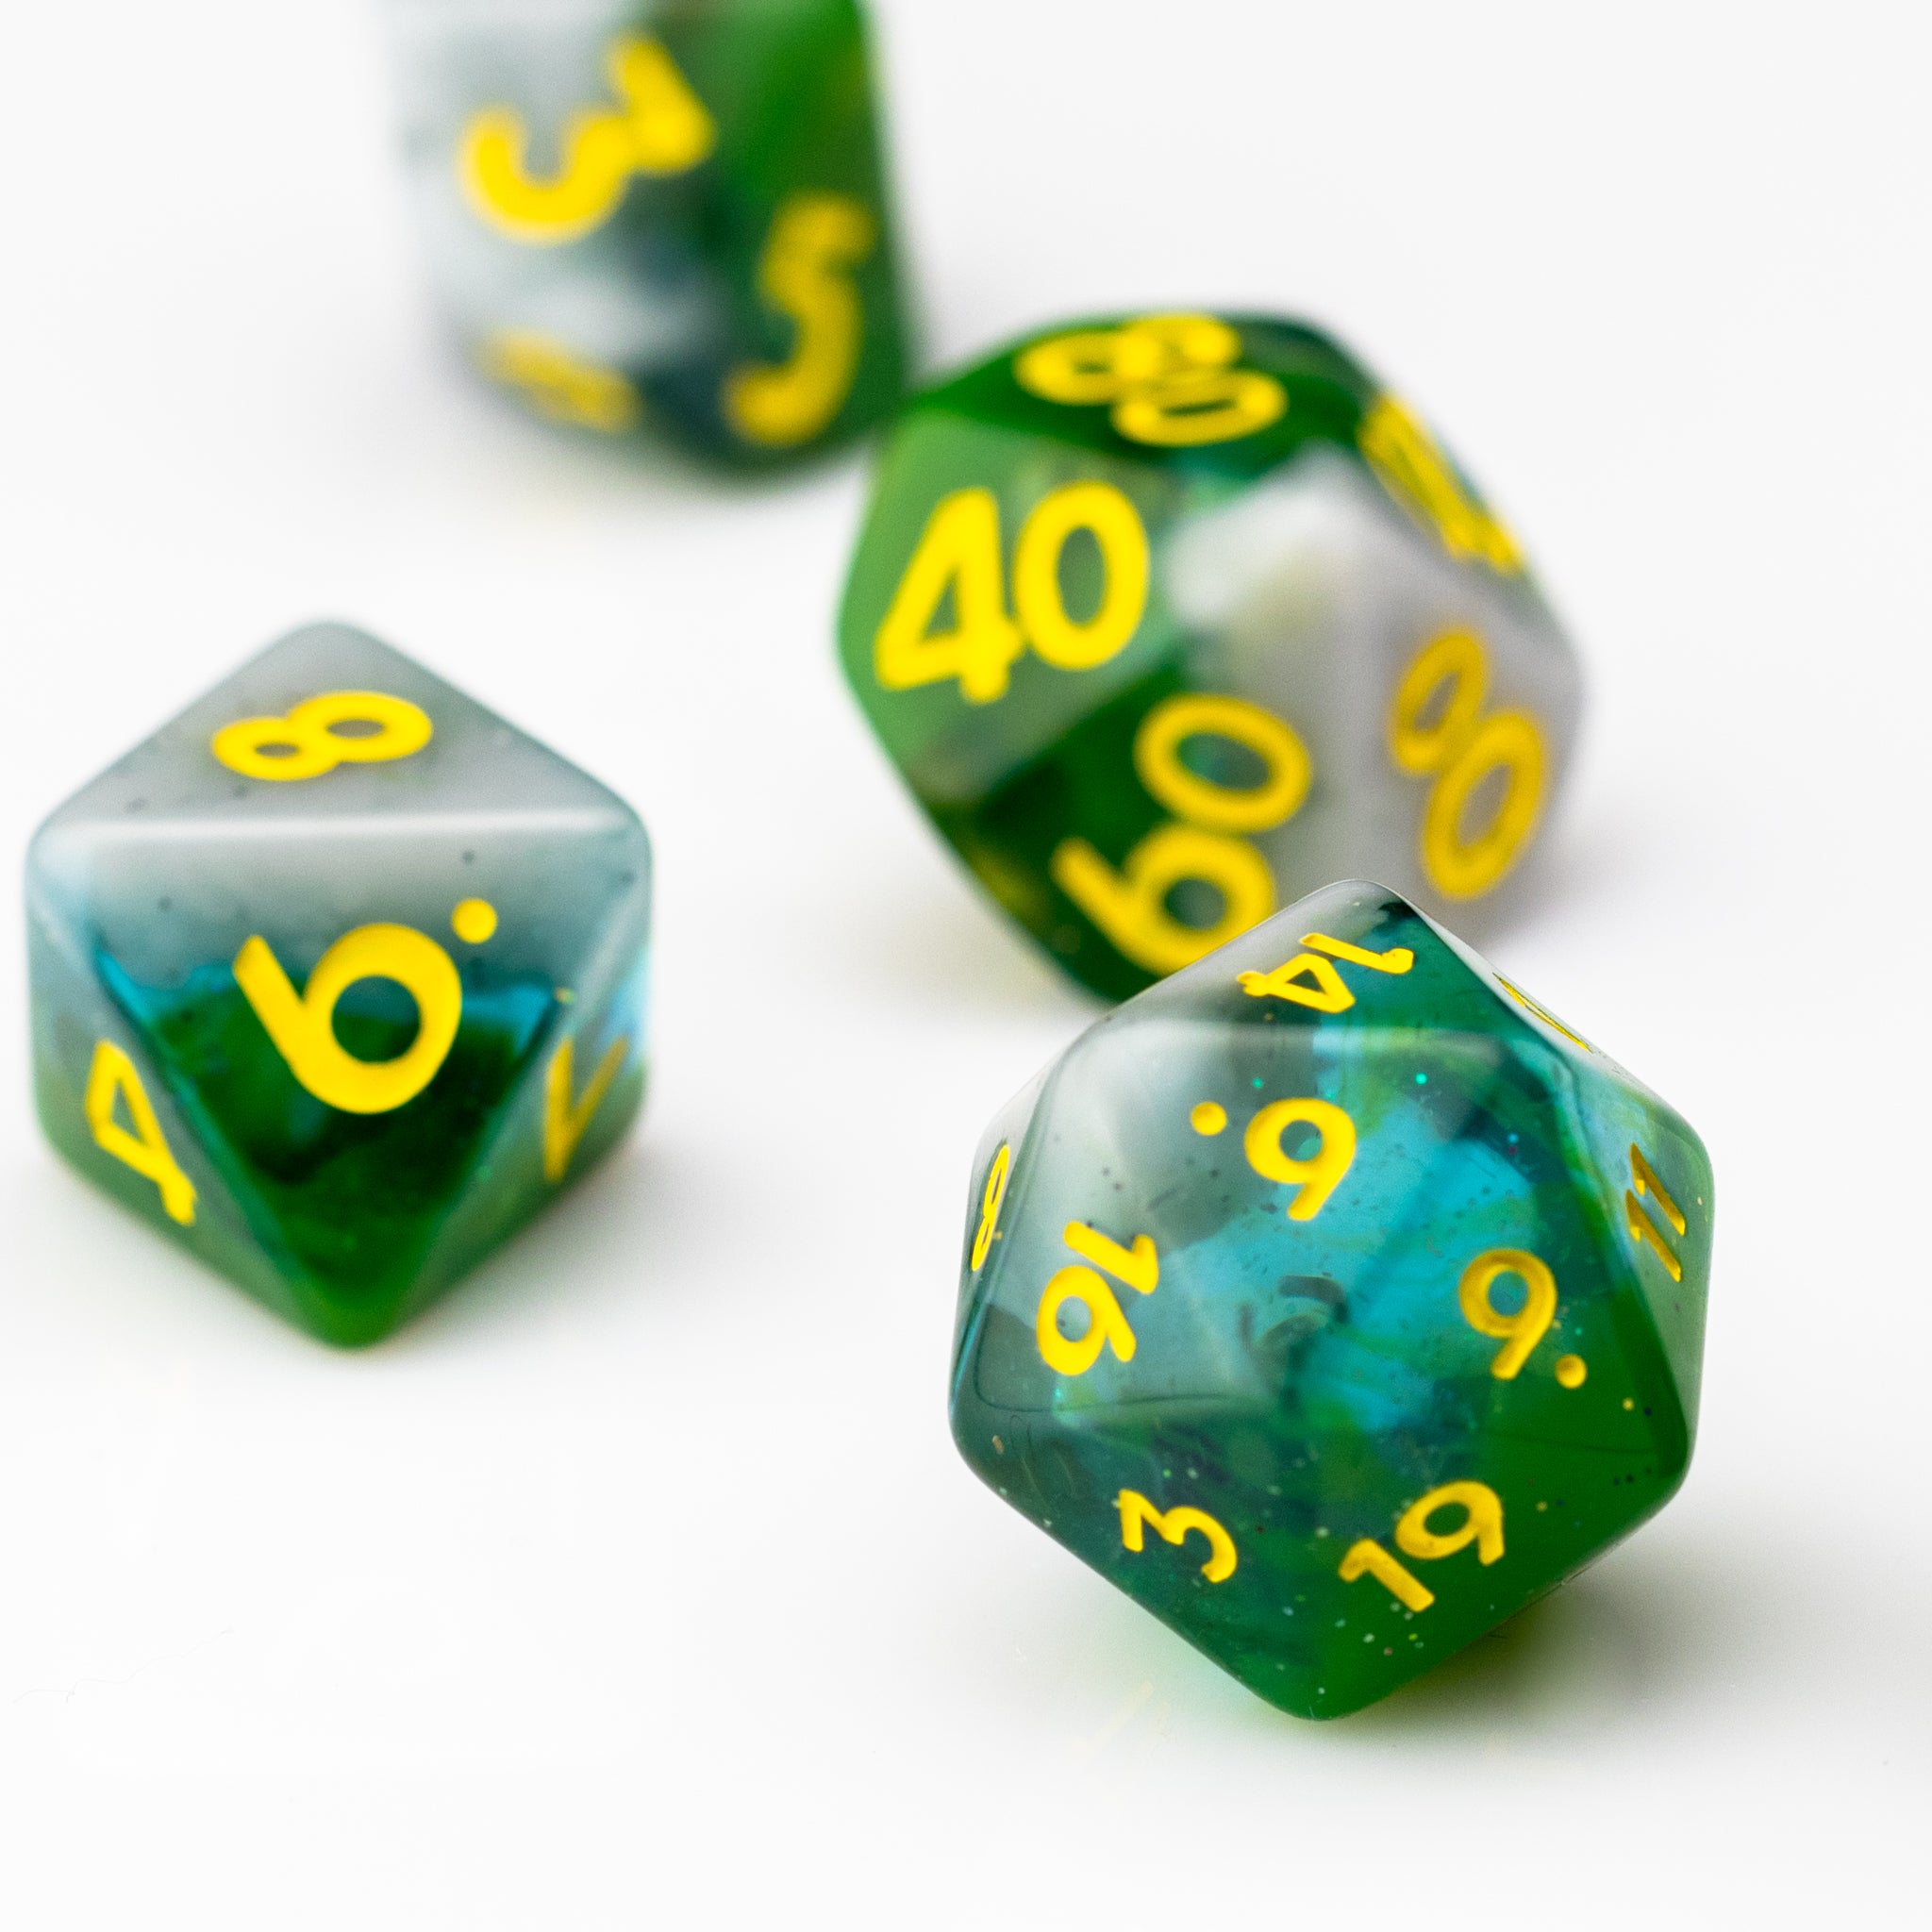 Monthly RPG Dice Subscription